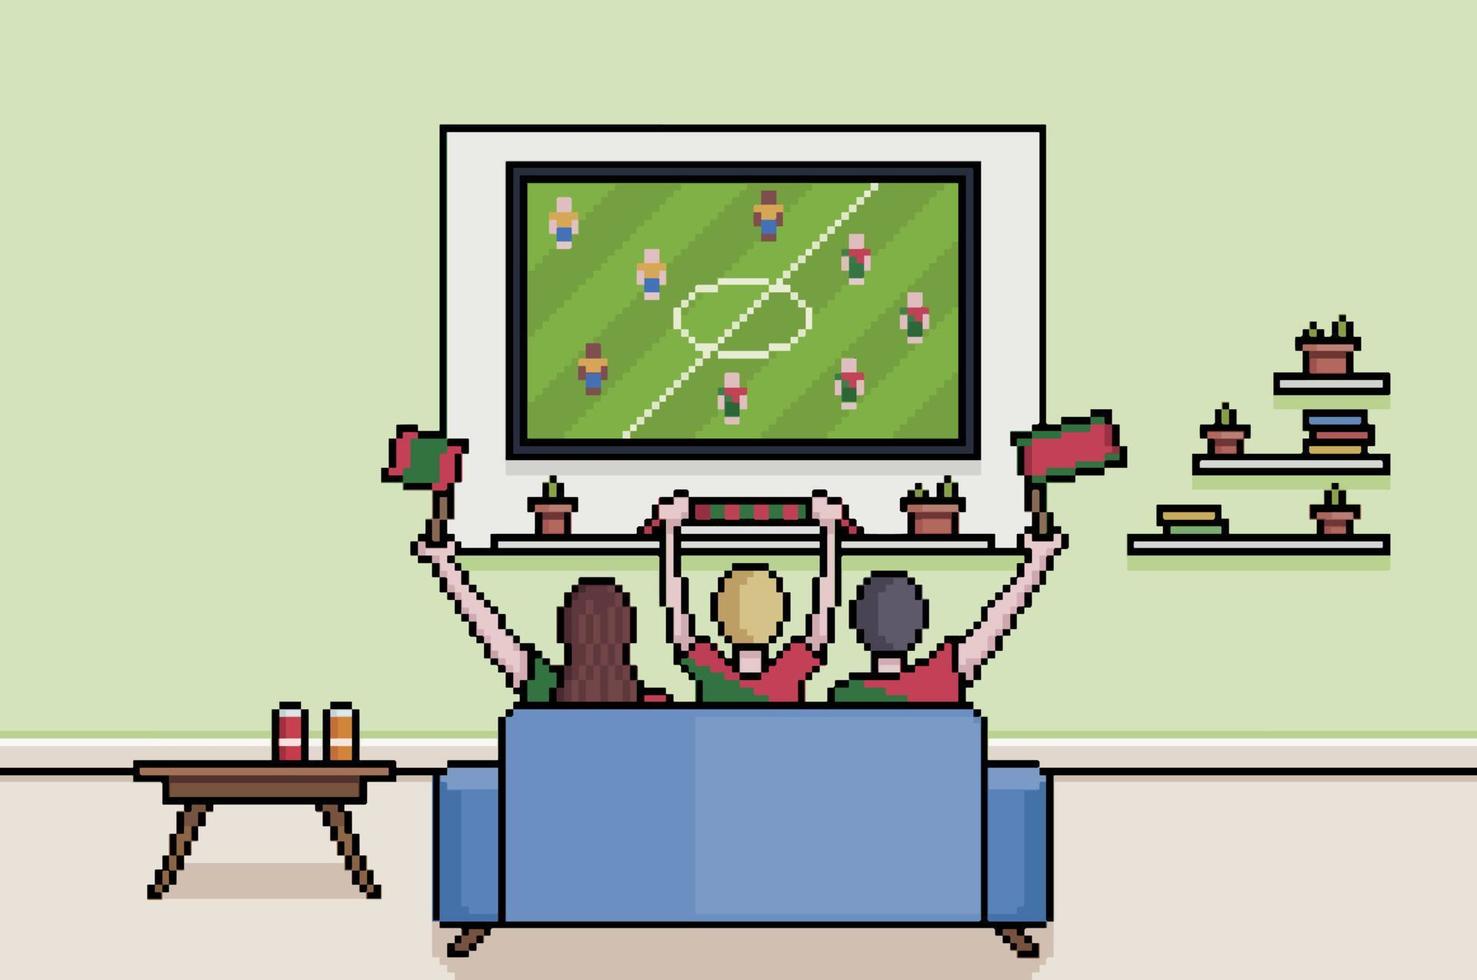 Pixel art fans watching football on tv in living room, portuguese people watching the world cup 8bit background vector